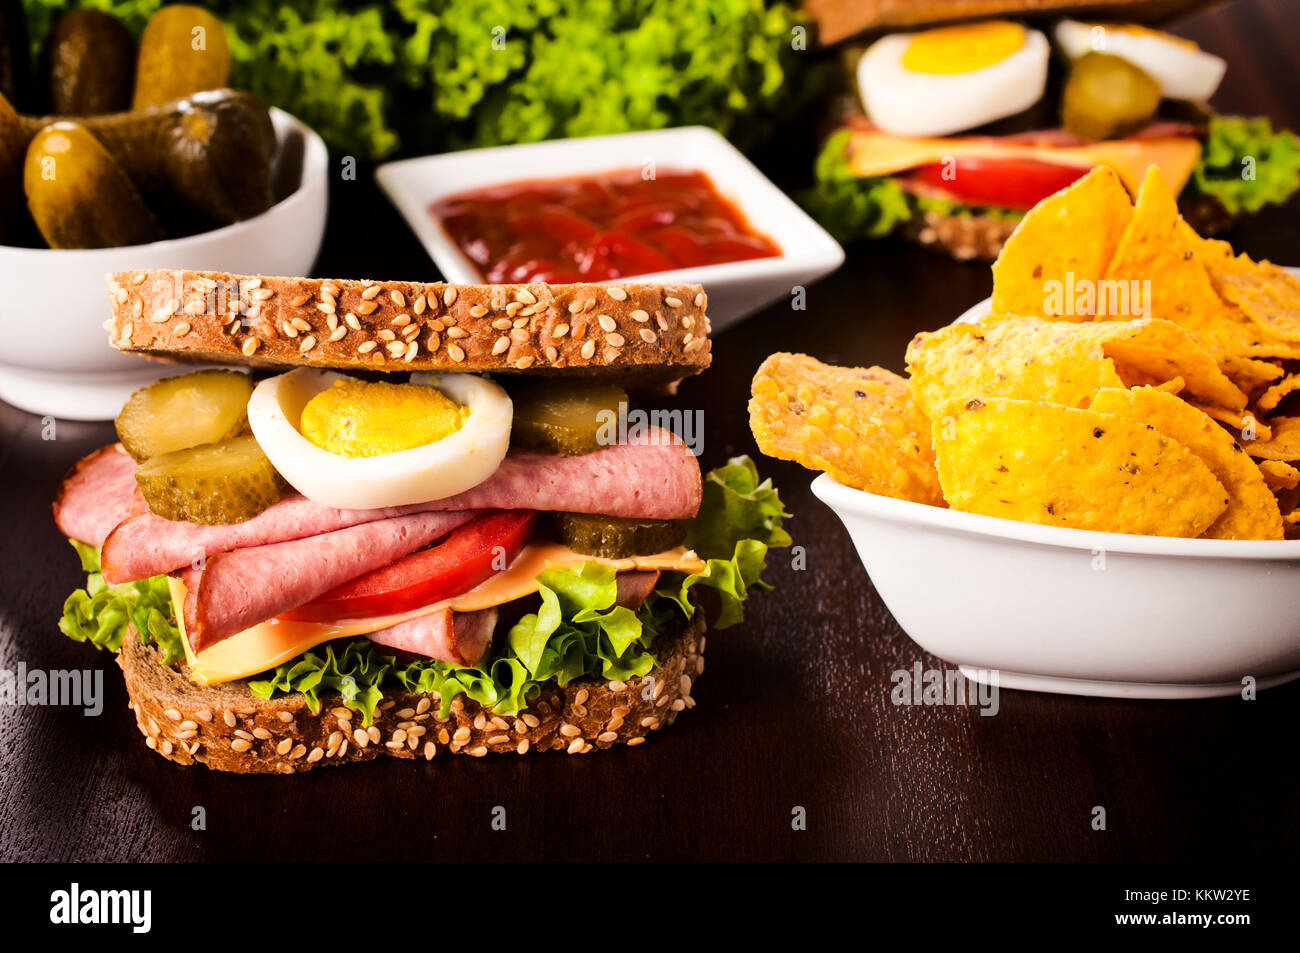 Toast sandwich and tortilla chips on the wooden table Stock Photo